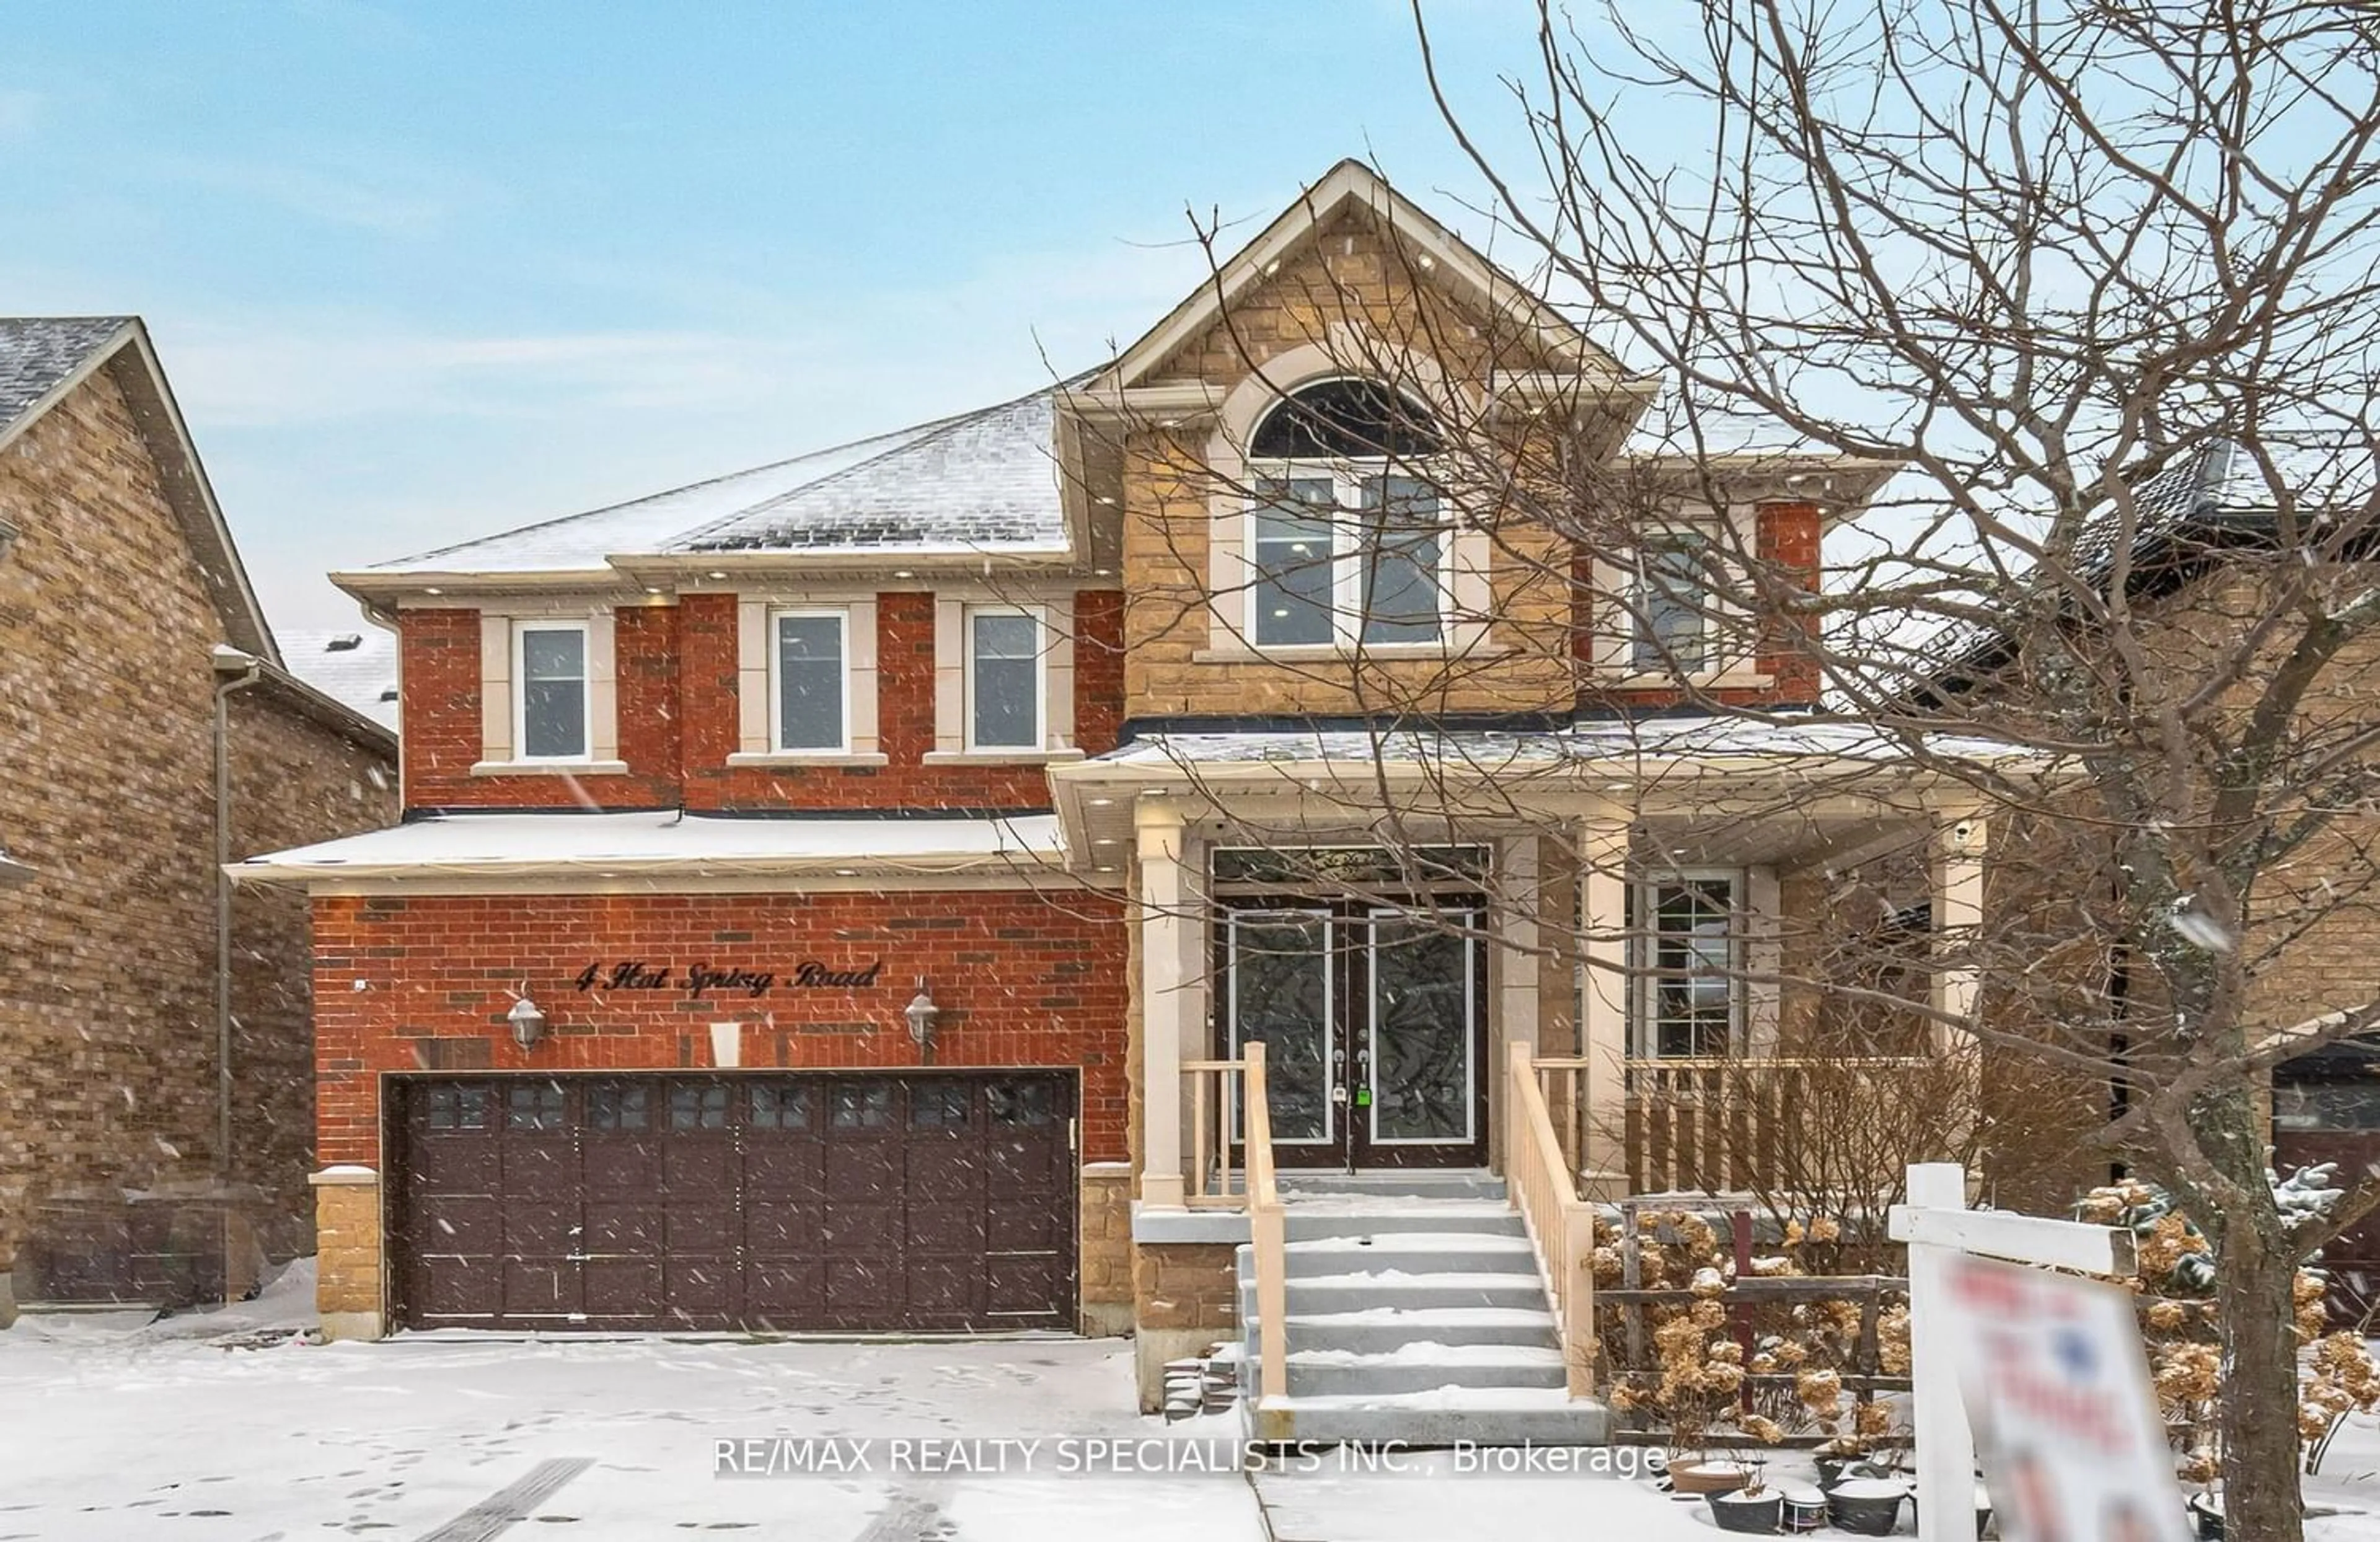 Home with brick exterior material for 4 Hot Spring Rd, Brampton Ontario L6R 3J1